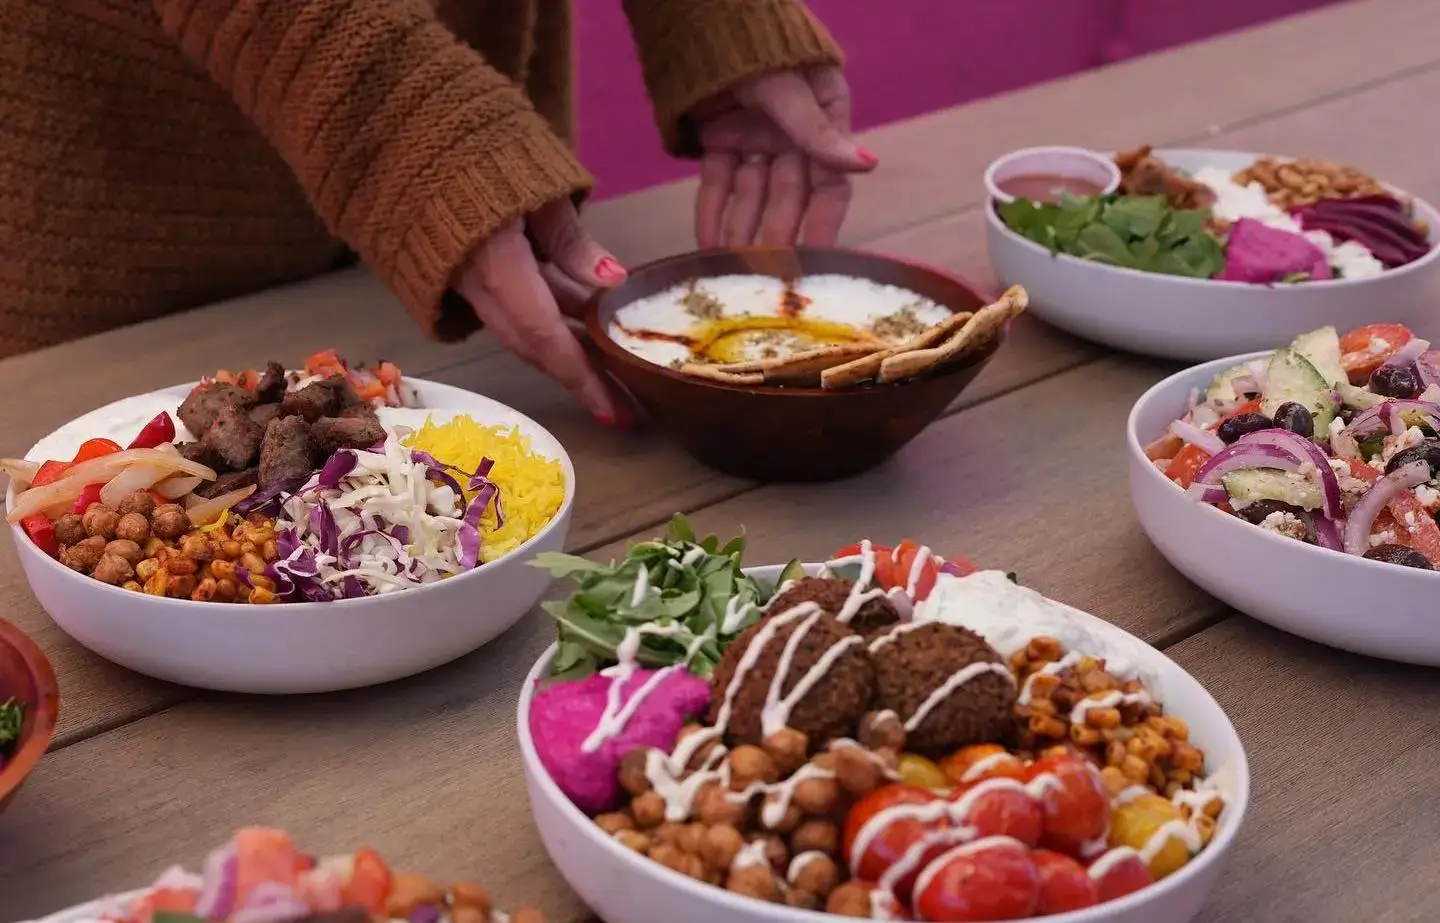 Hands reaching for one of several different falafel bowls on a table